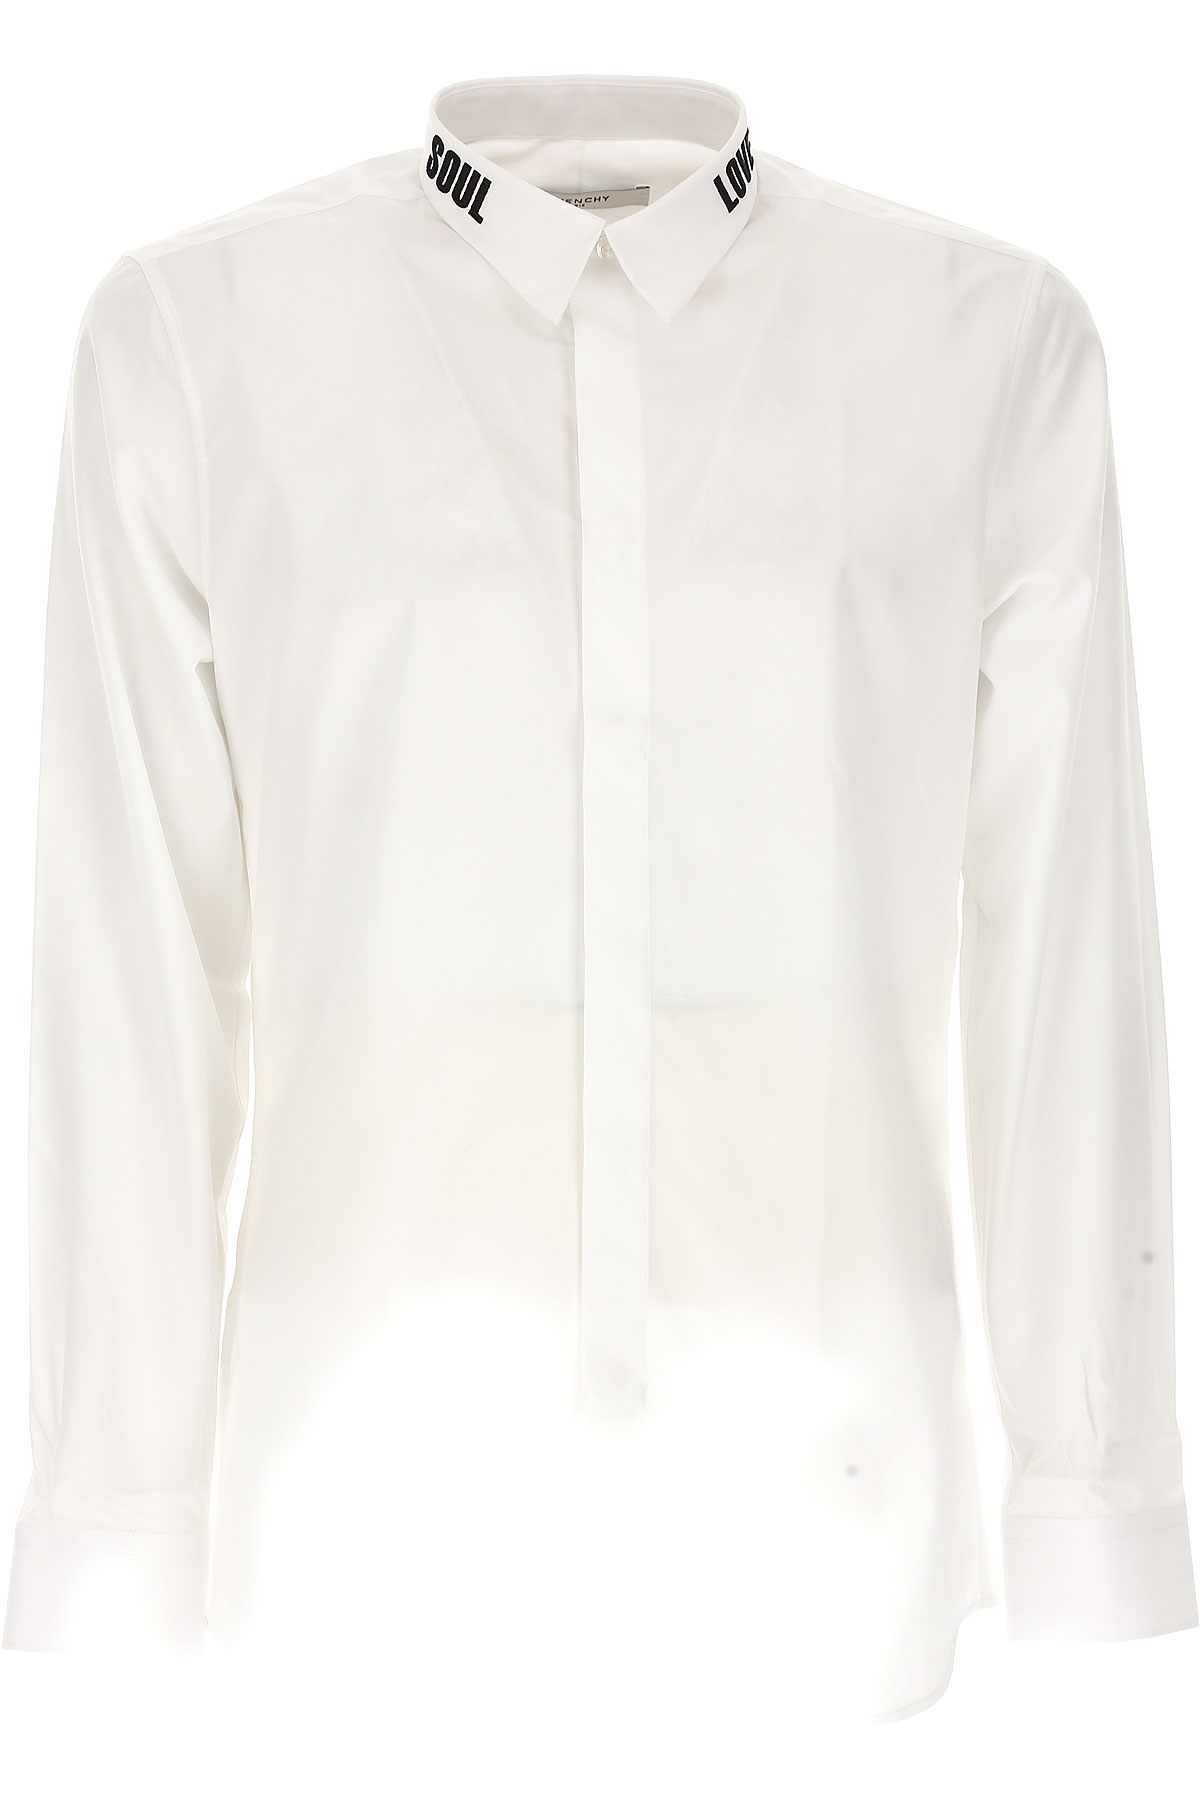 Givenchy Chemise Homme, Blanc, Coton, 2017, 40 41